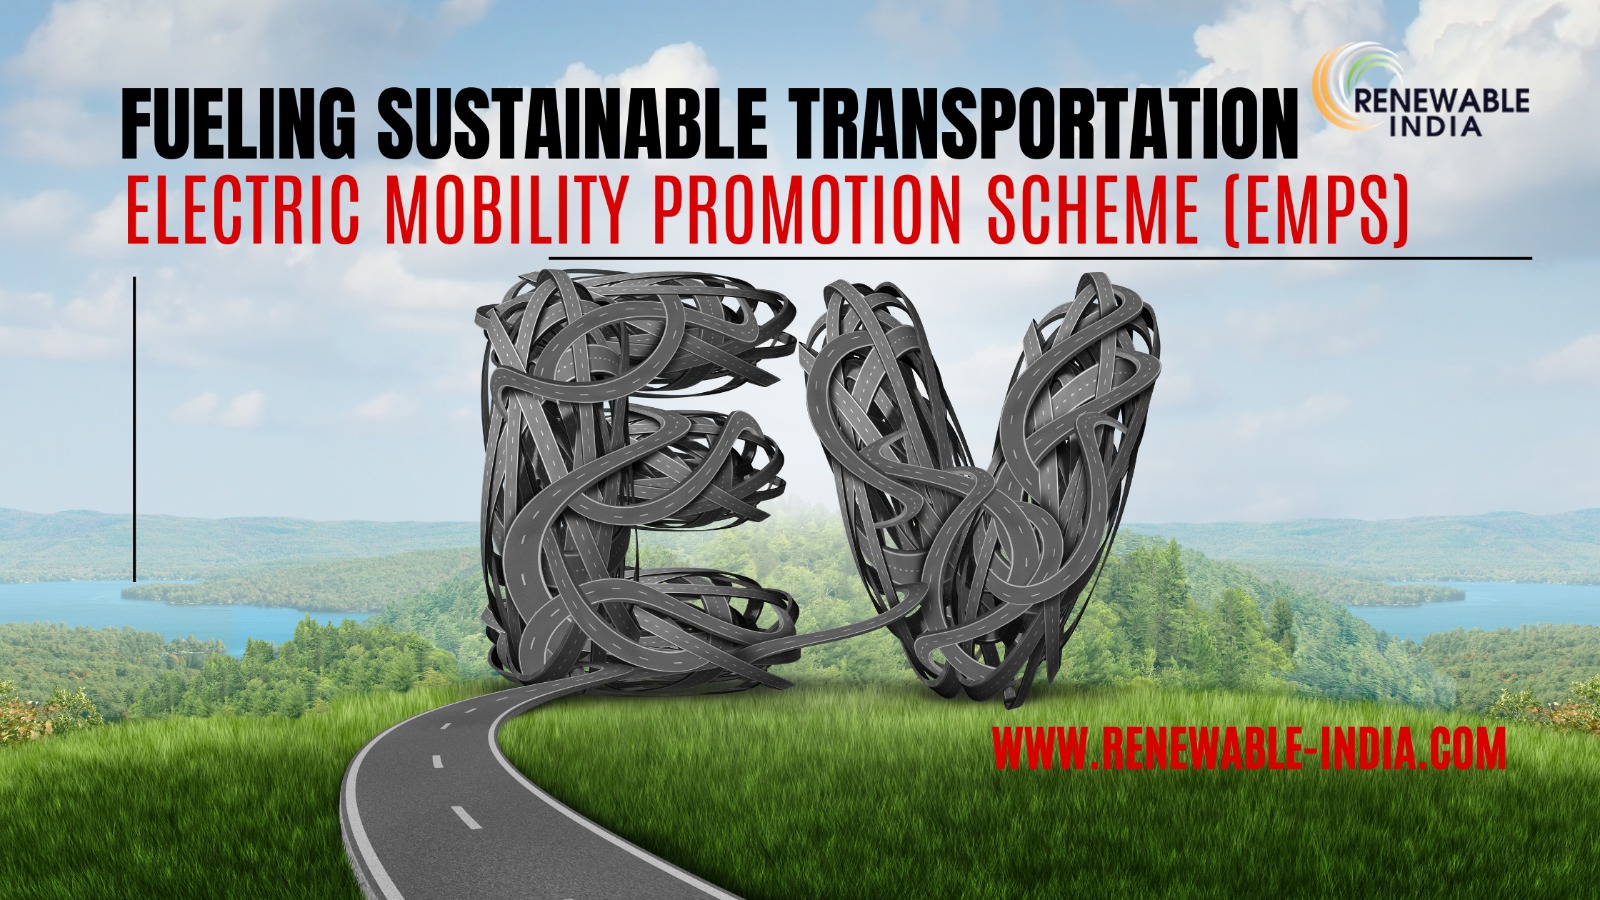 Empowering Green Mobility: The Electric Mobility Promotion Scheme (EMPS)